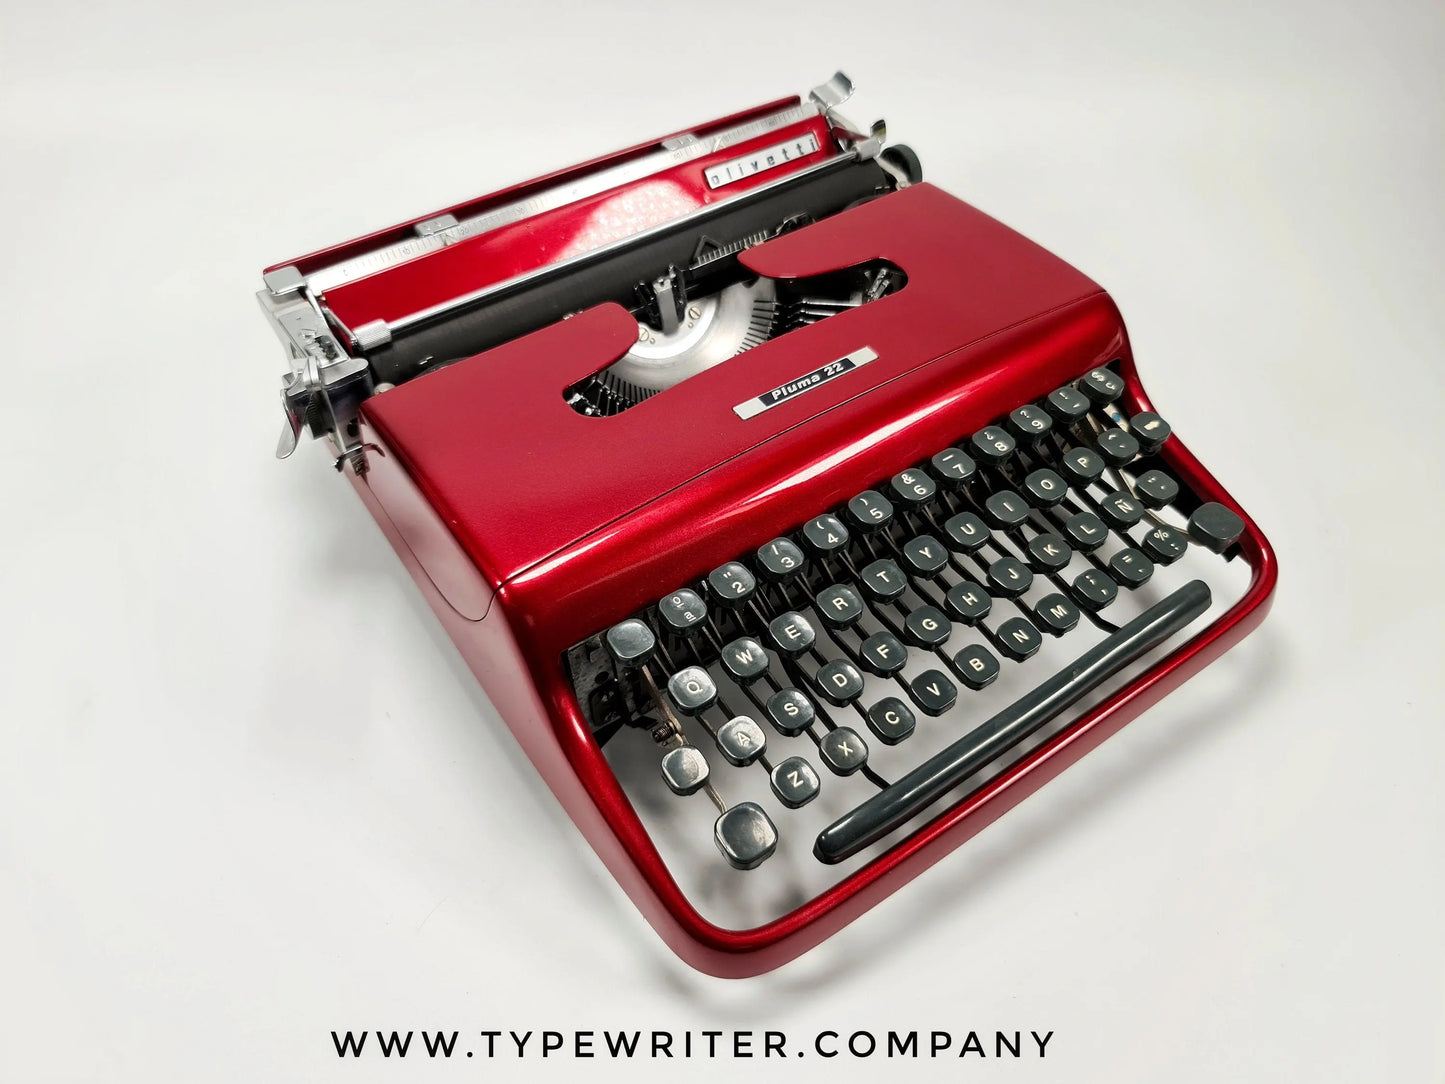 Limited Edition Olivetti Pluma 22 Coral Red, Vintage, Mint Condition, Manual Portable, Professionally Serviced by Typewriter.Company - ElGranero Typewriter.Company